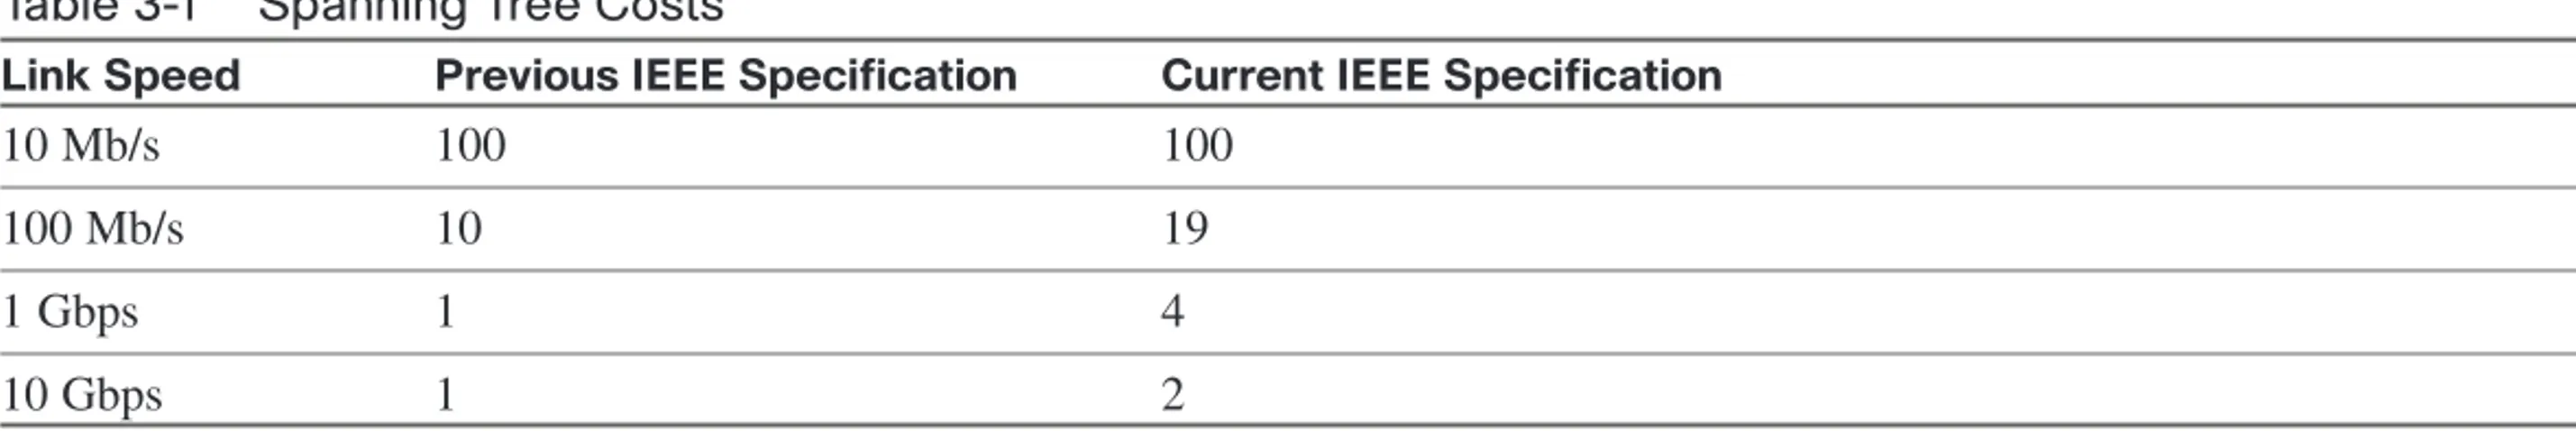 Table 3-1 Spanning Tree Costs